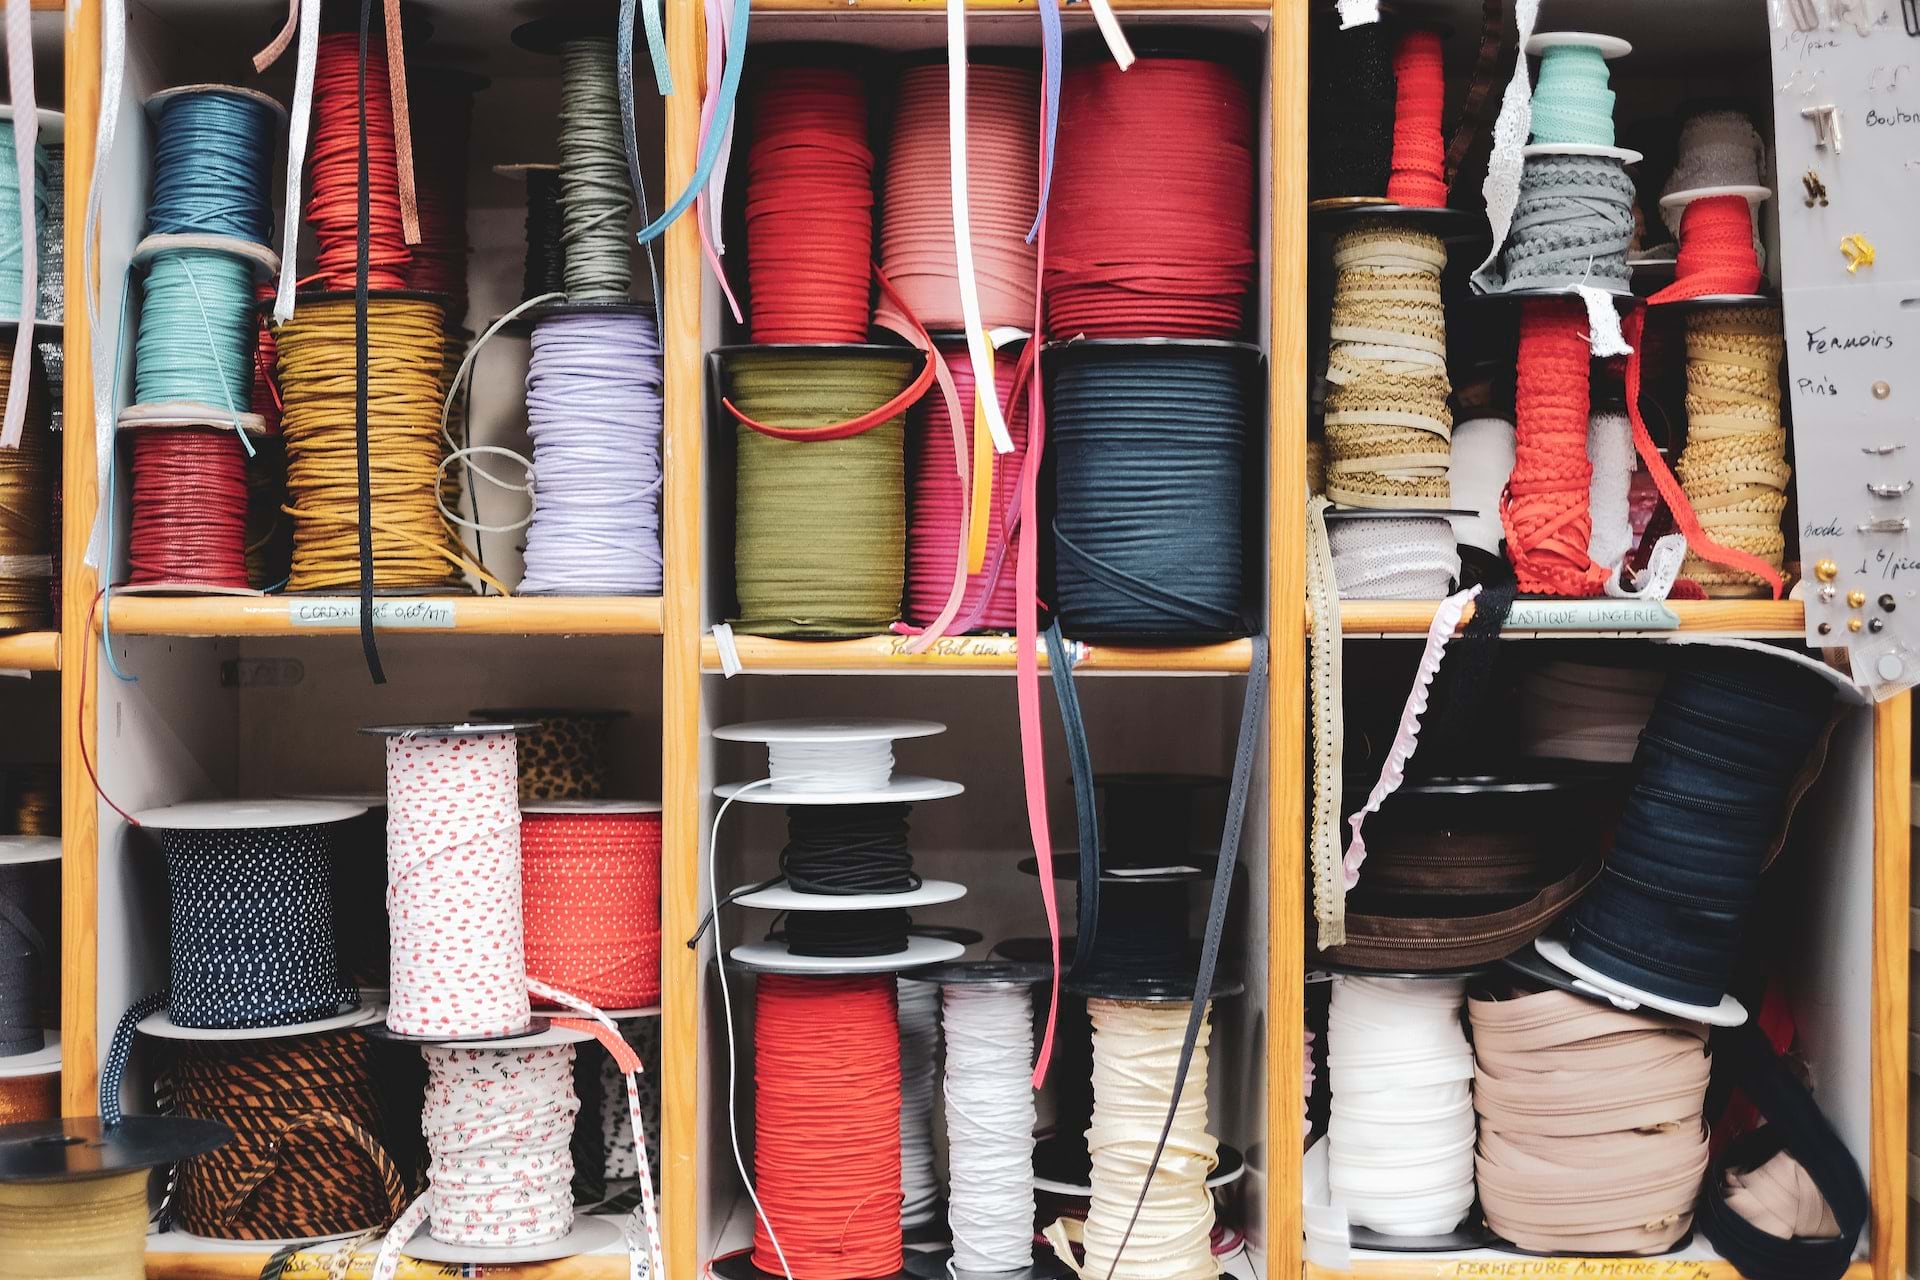 Multi-colored spools of thread sit in small divided cubbies